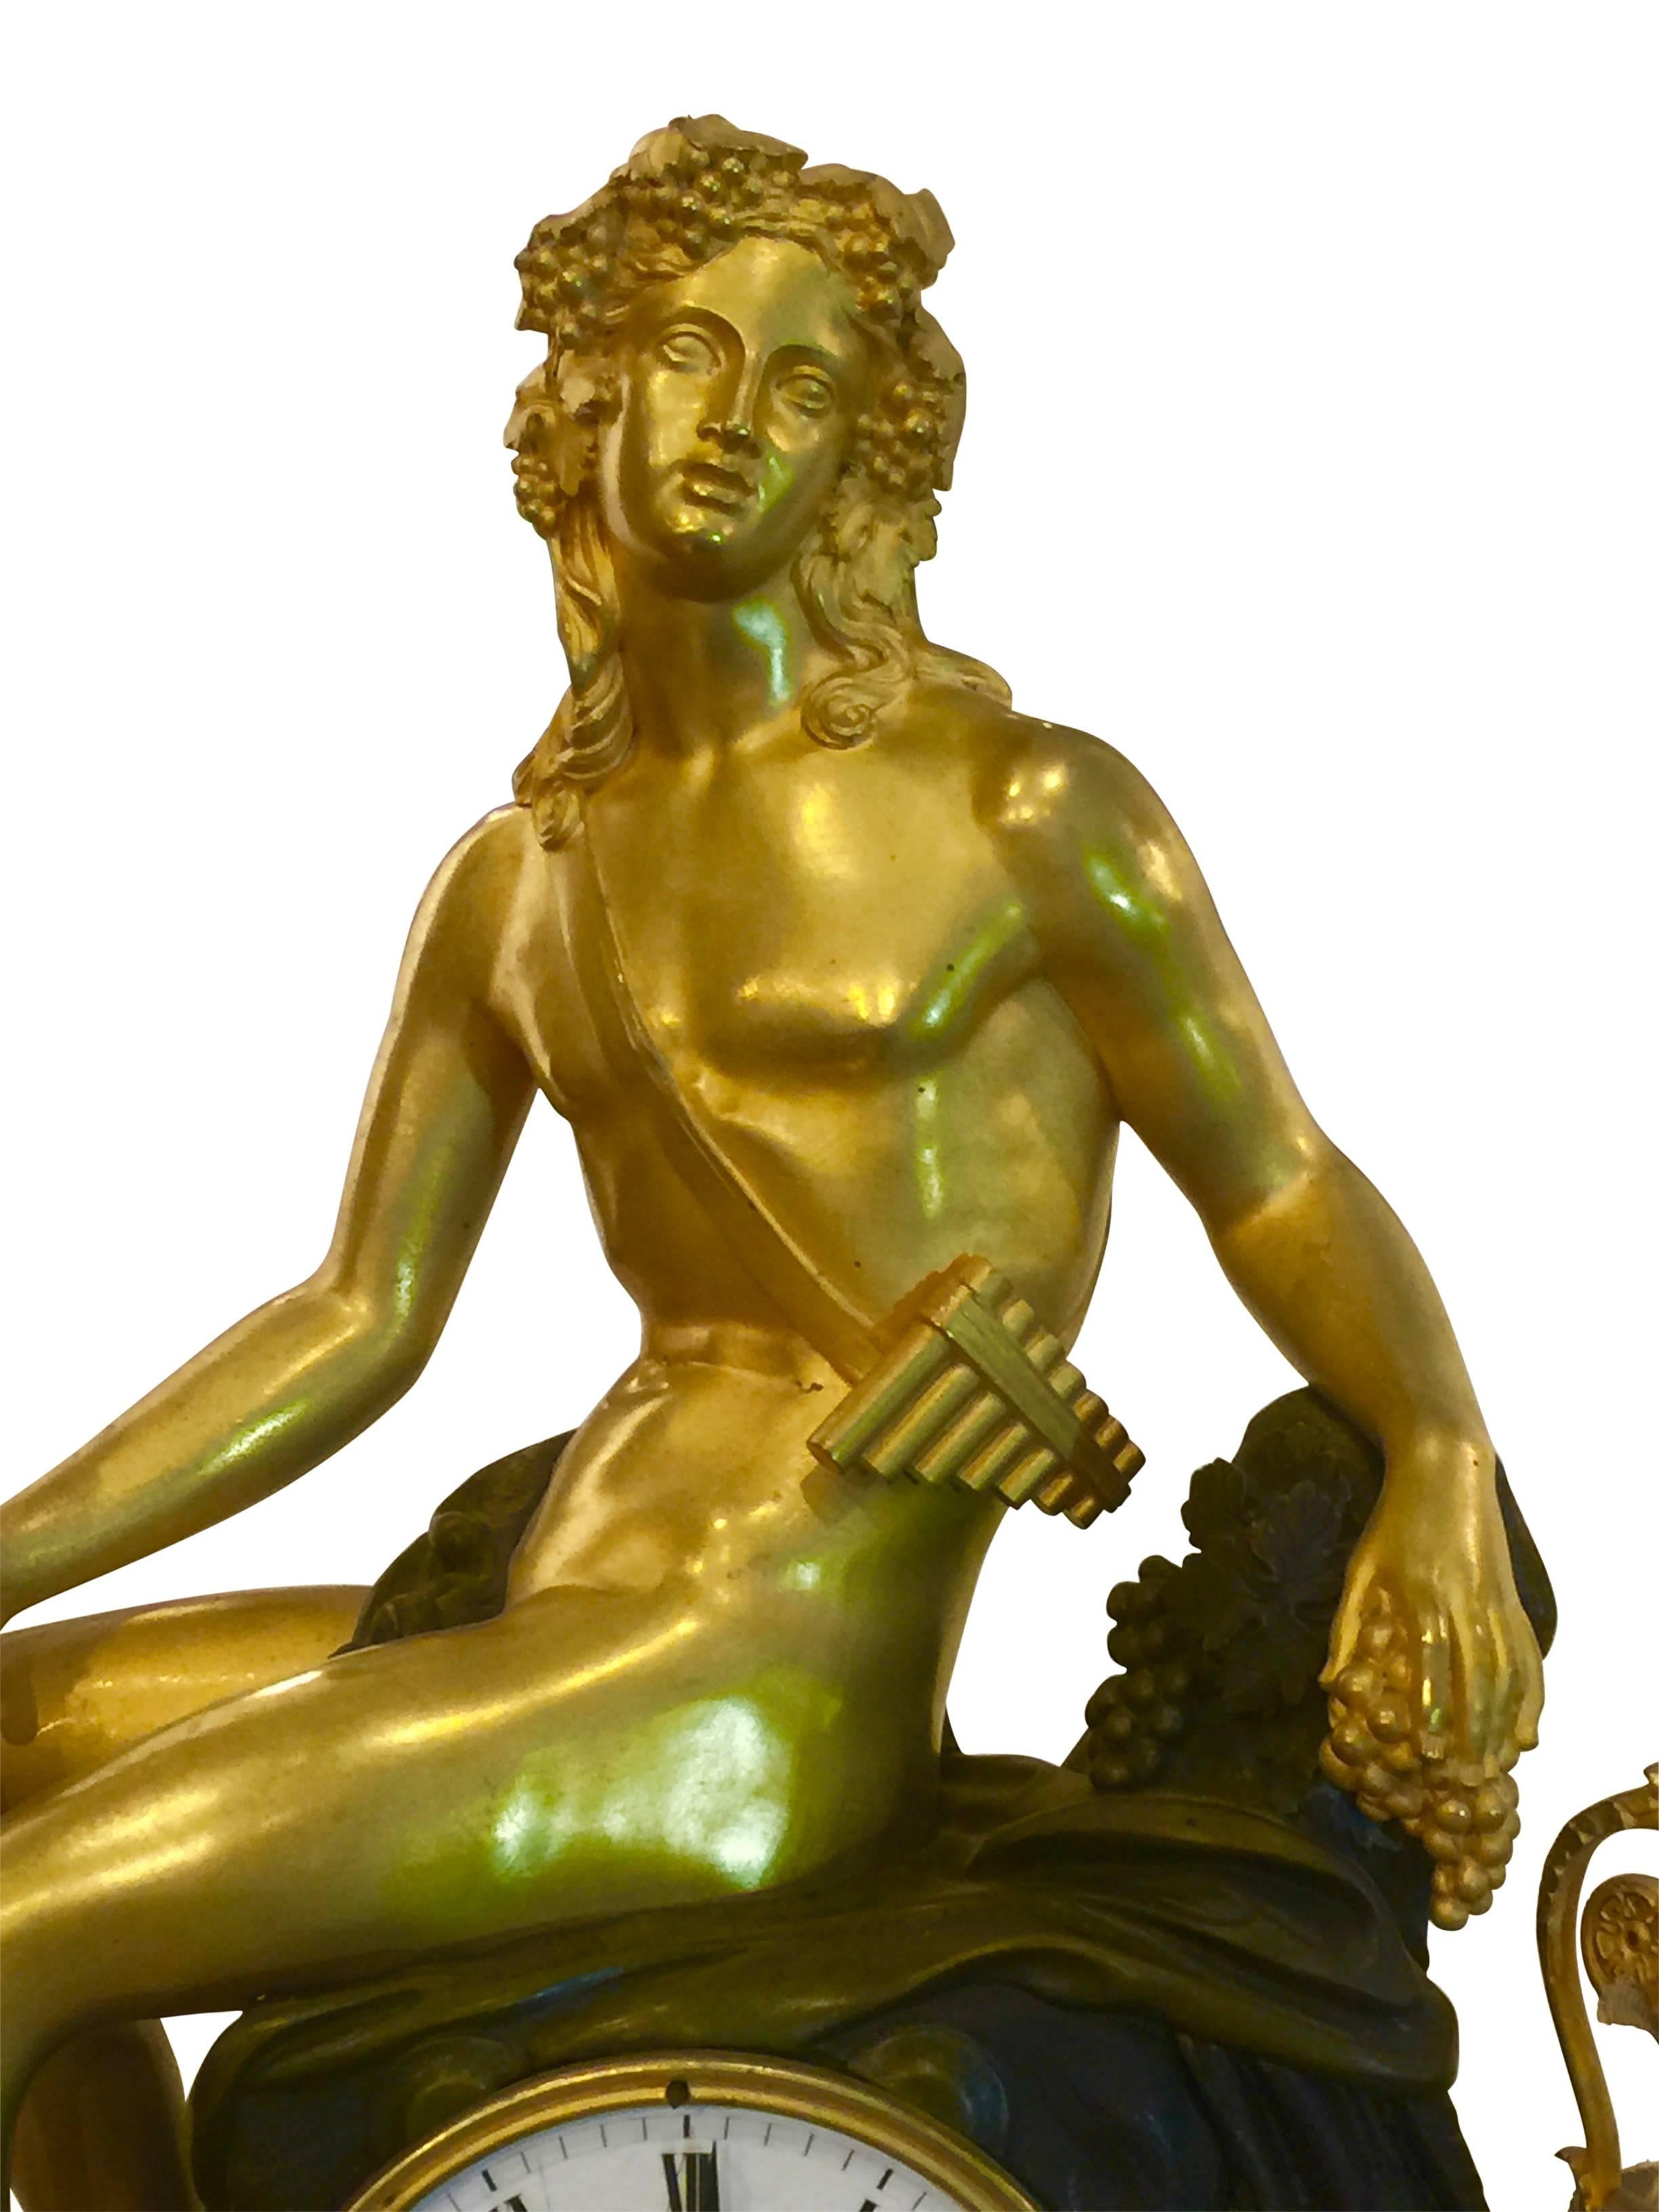 French bronze clock, early 19th century, partially fire-gilded, half-stroke on bell, pendulum amit thread suspension, eight-day work. Bacchus as a beautiful youth in the loincloth with a pan flute. In his hand he holds a ceremonial stick entangled